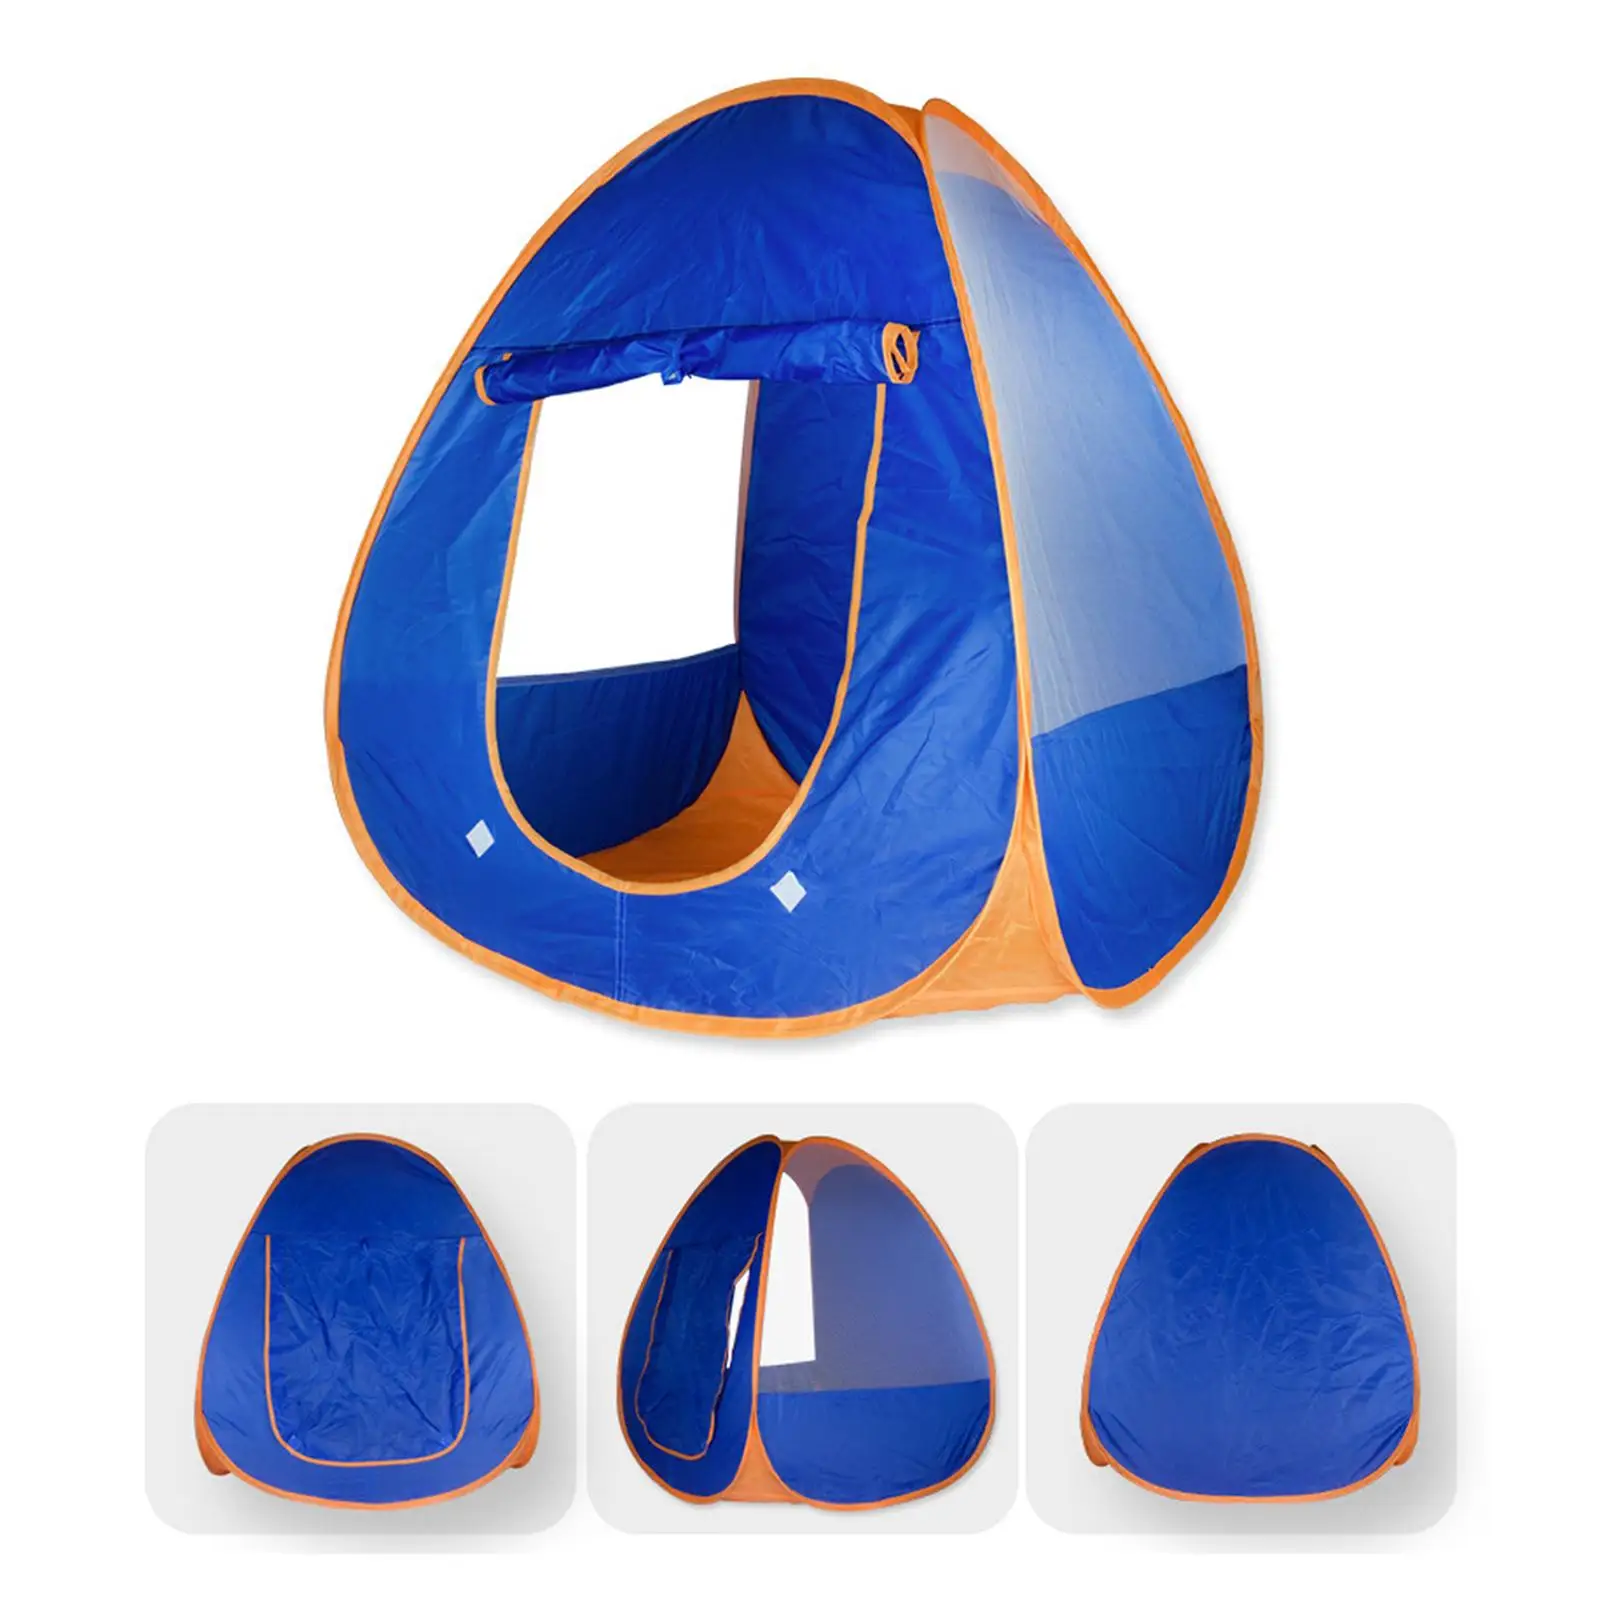 Children Play Tent Collapsible Role Play Toy Portable Child Room Decoration for Indoor Outdoor Home Party Camping Nursery Room